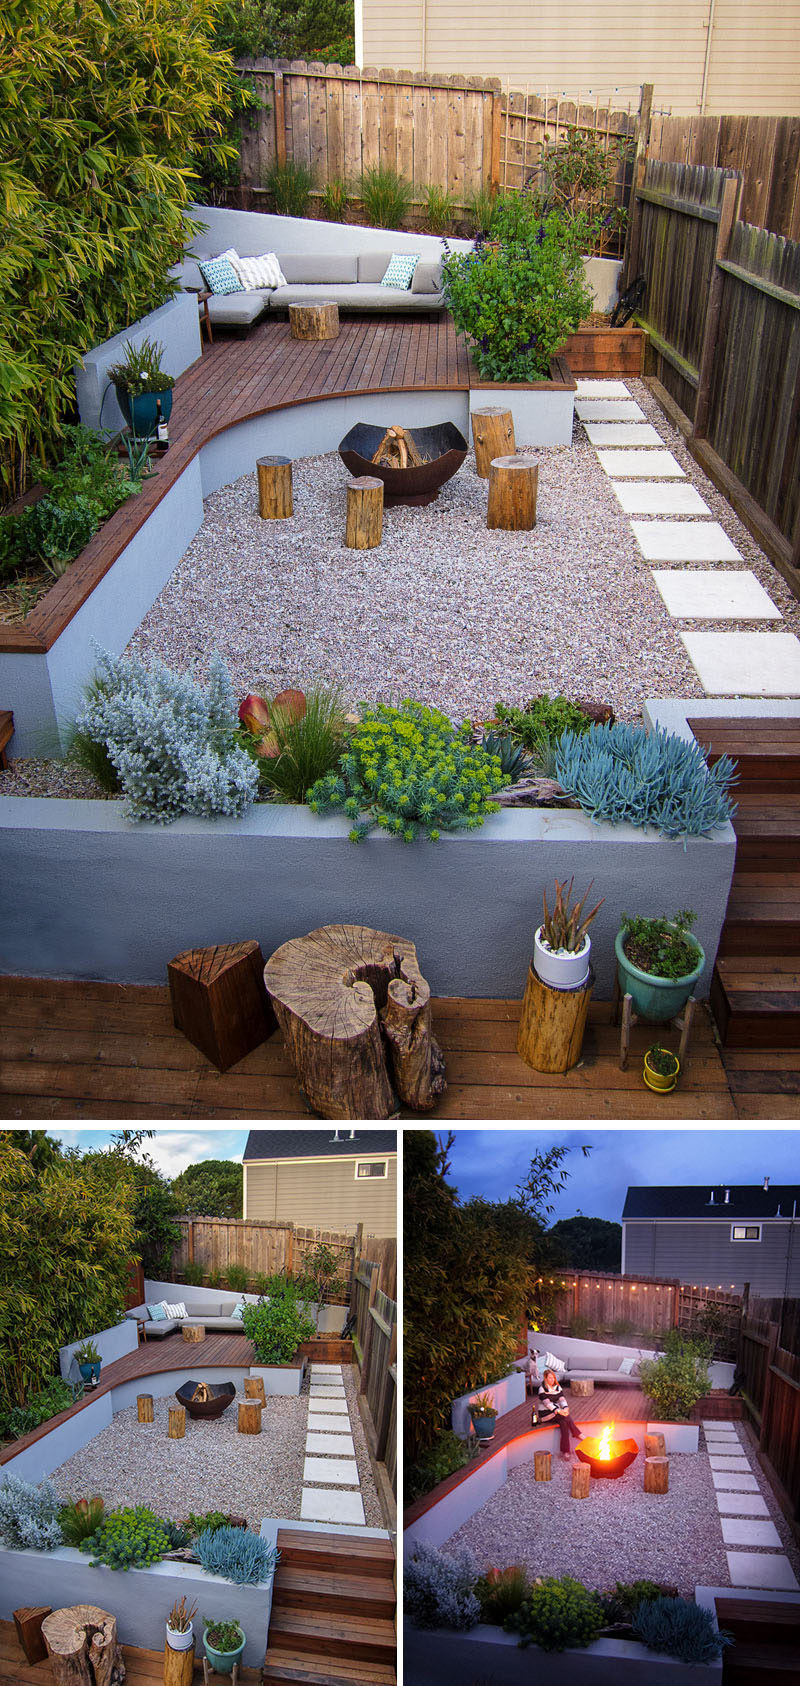 Landscape Design San Francisco
 This Small Backyard In San Francisco Was Designed For